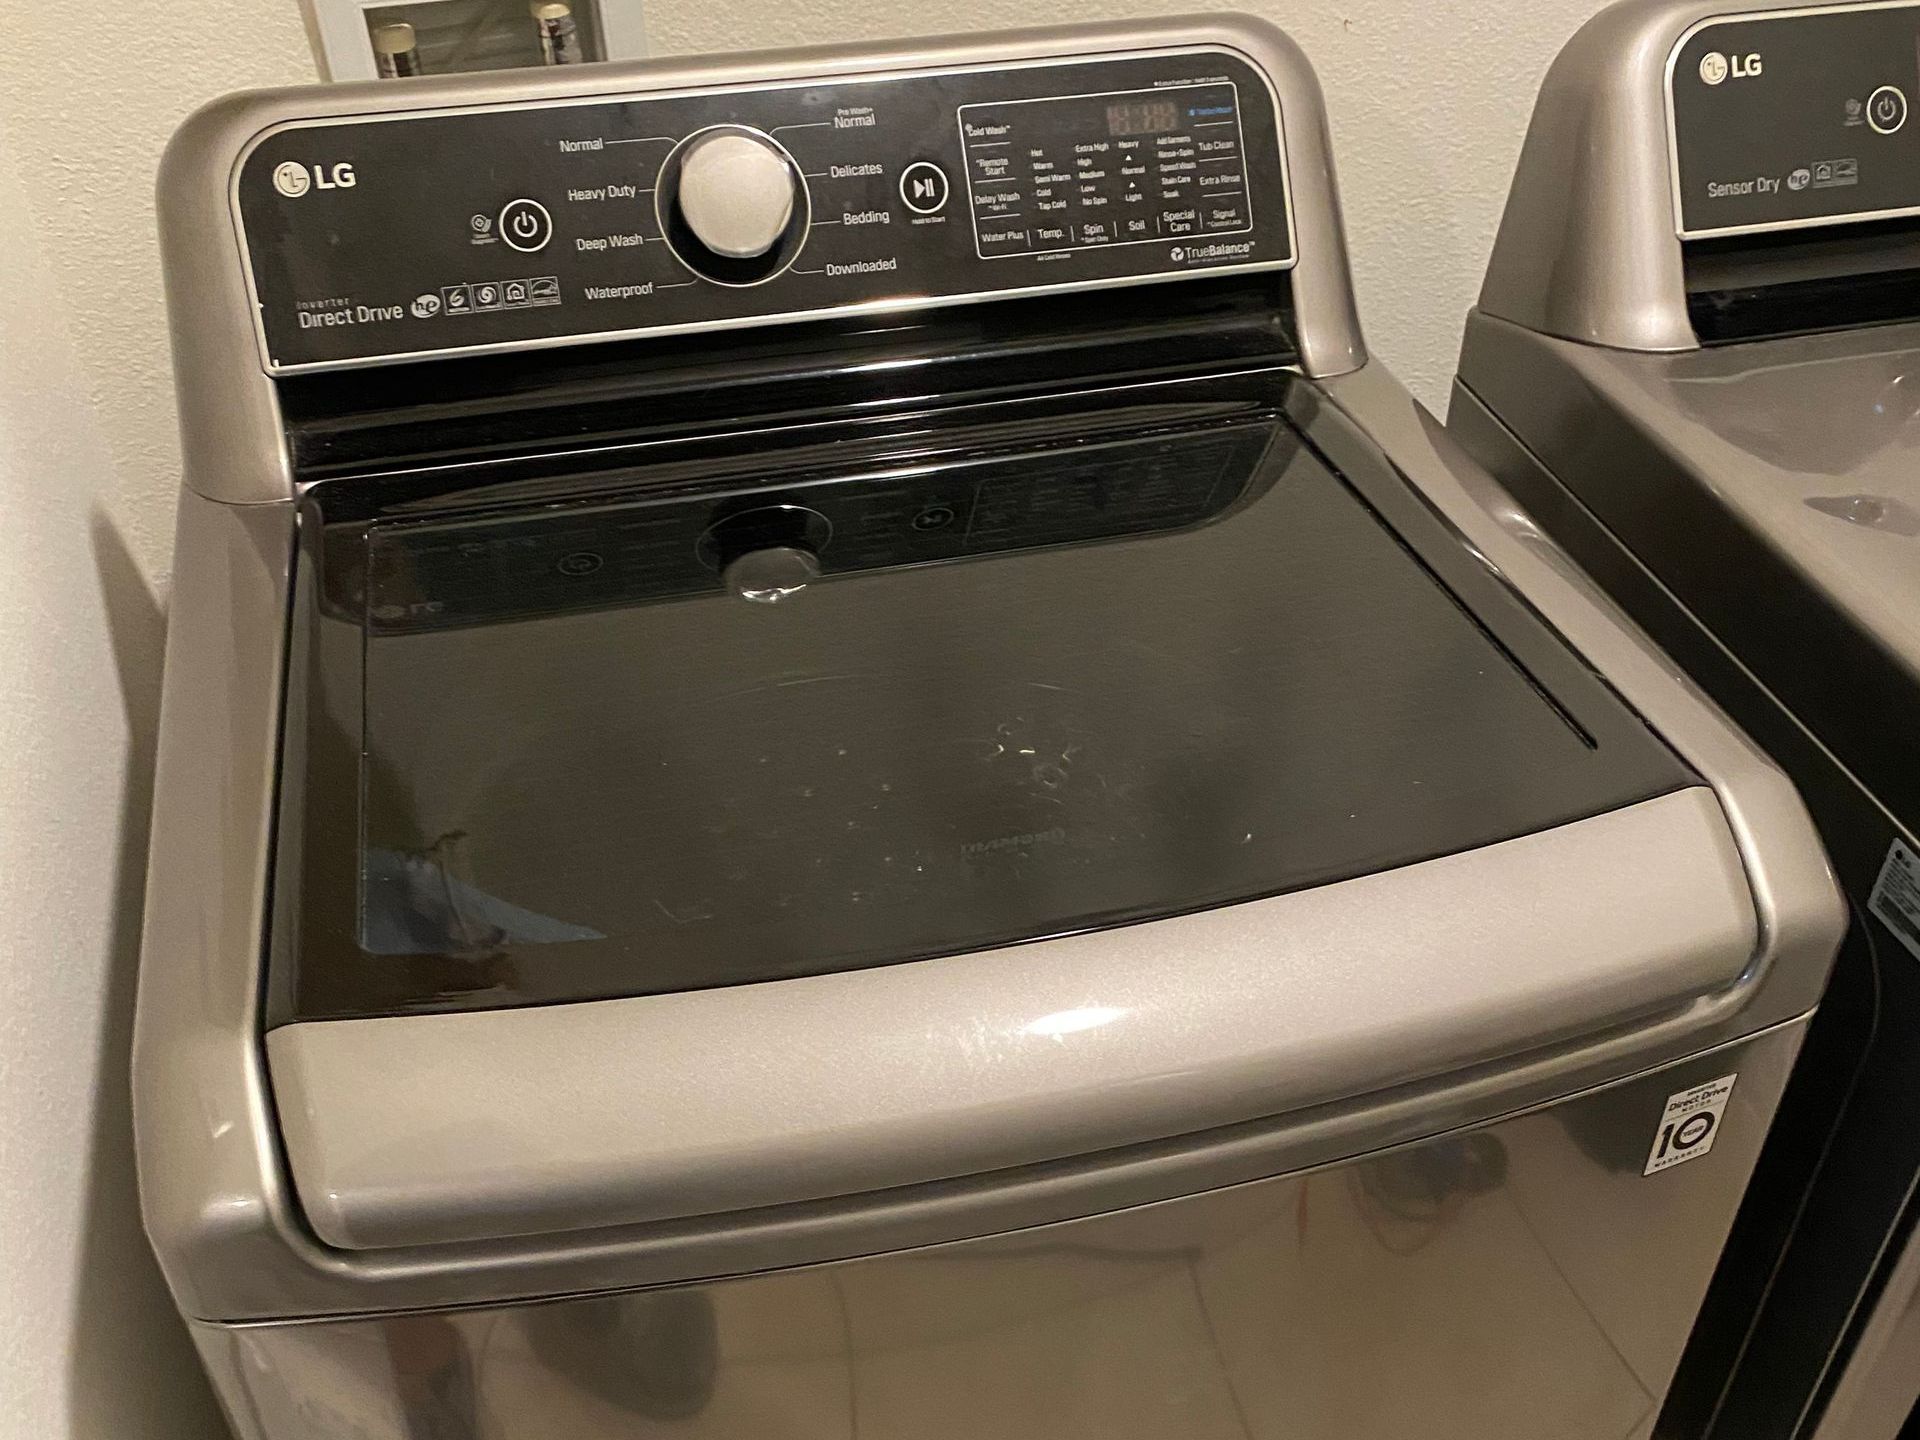 LG washer repair by Level Appliance Repair